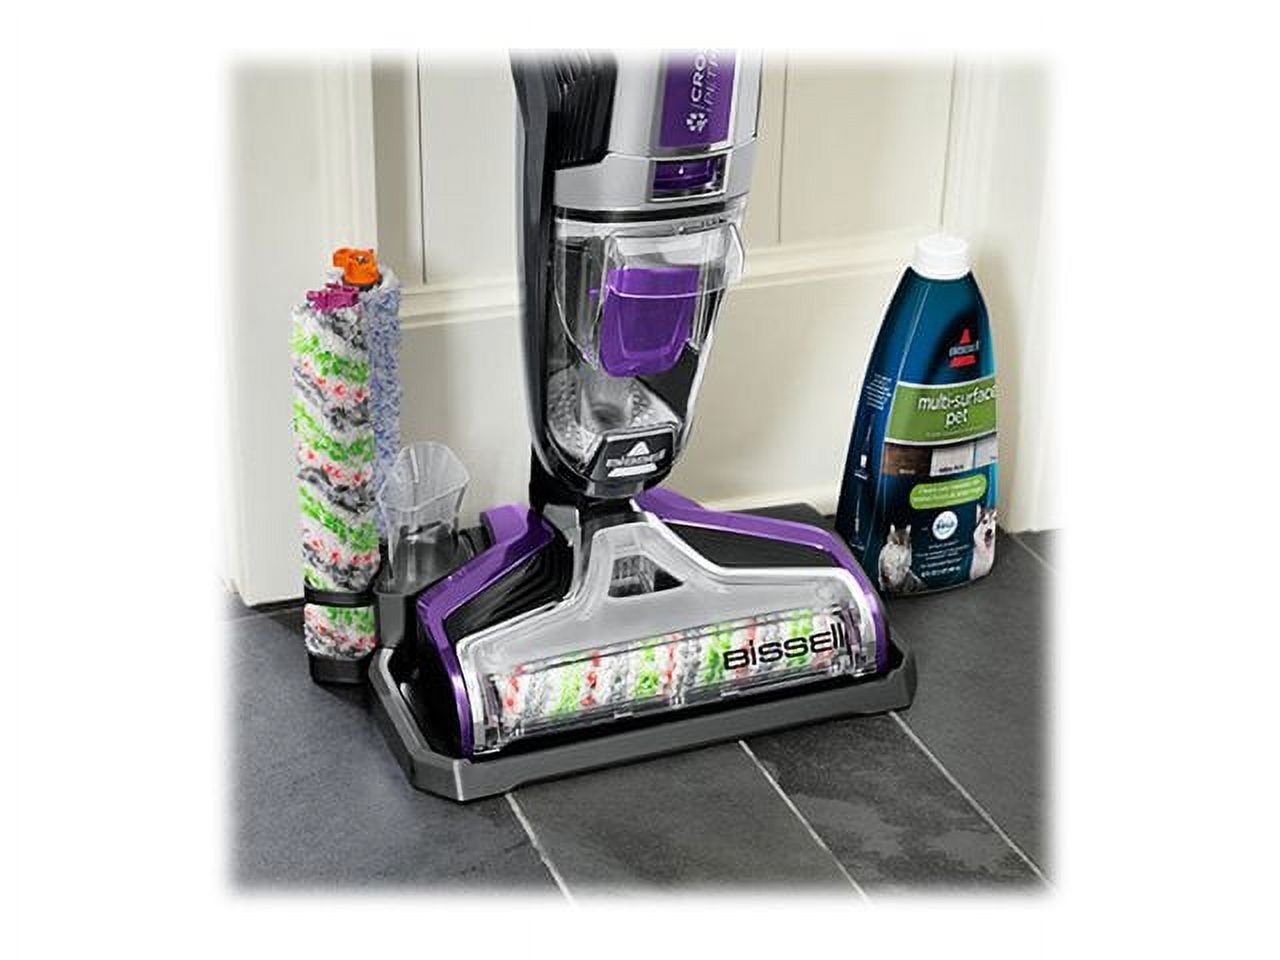 BISSELL Crosswave Pet Pro Wet Dry Vacuum, 2306A - image 4 of 6